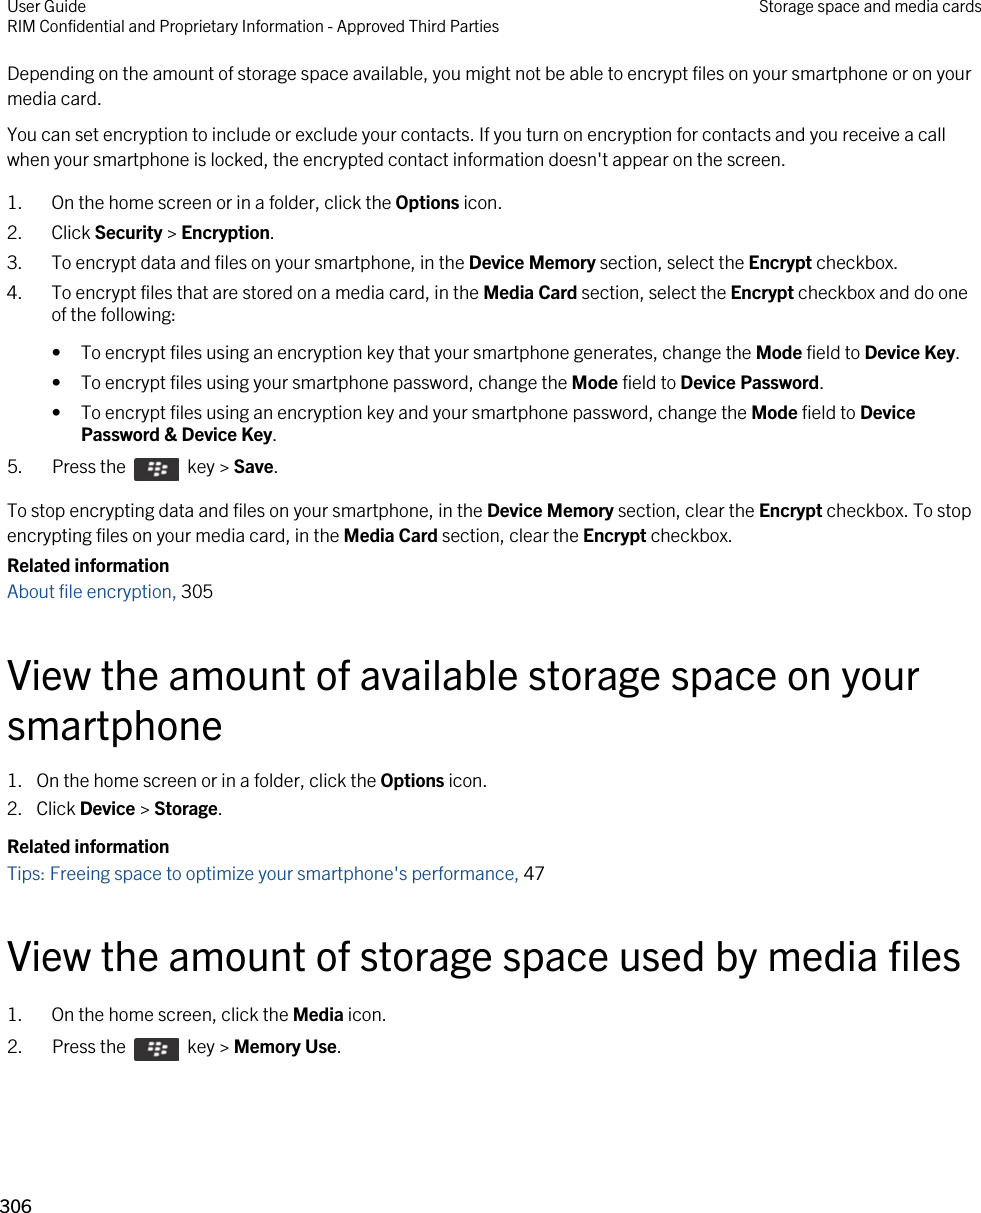 Depending on the amount of storage space available, you might not be able to encrypt files on your smartphone or on your media card.You can set encryption to include or exclude your contacts. If you turn on encryption for contacts and you receive a call when your smartphone is locked, the encrypted contact information doesn&apos;t appear on the screen.1. On the home screen or in a folder, click the Options icon.2. Click Security &gt; Encryption.3. To encrypt data and files on your smartphone, in the Device Memory section, select the Encrypt checkbox.4. To encrypt files that are stored on a media card, in the Media Card section, select the Encrypt checkbox and do one of the following:• To encrypt files using an encryption key that your smartphone generates, change the Mode field to Device Key.• To encrypt files using your smartphone password, change the Mode field to Device Password.• To encrypt files using an encryption key and your smartphone password, change the Mode field to Device Password &amp; Device Key.5.  Press the    key &gt; Save. To stop encrypting data and files on your smartphone, in the Device Memory section, clear the Encrypt checkbox. To stop encrypting files on your media card, in the Media Card section, clear the Encrypt checkbox.Related informationAbout file encryption, 305 View the amount of available storage space on your smartphone1. On the home screen or in a folder, click the Options icon.2. Click Device &gt; Storage.Related informationTips: Freeing space to optimize your smartphone&apos;s performance, 47 View the amount of storage space used by media files1. On the home screen, click the Media icon.2.  Press the    key &gt; Memory Use. User GuideRIM Confidential and Proprietary Information - Approved Third Parties Storage space and media cards306 